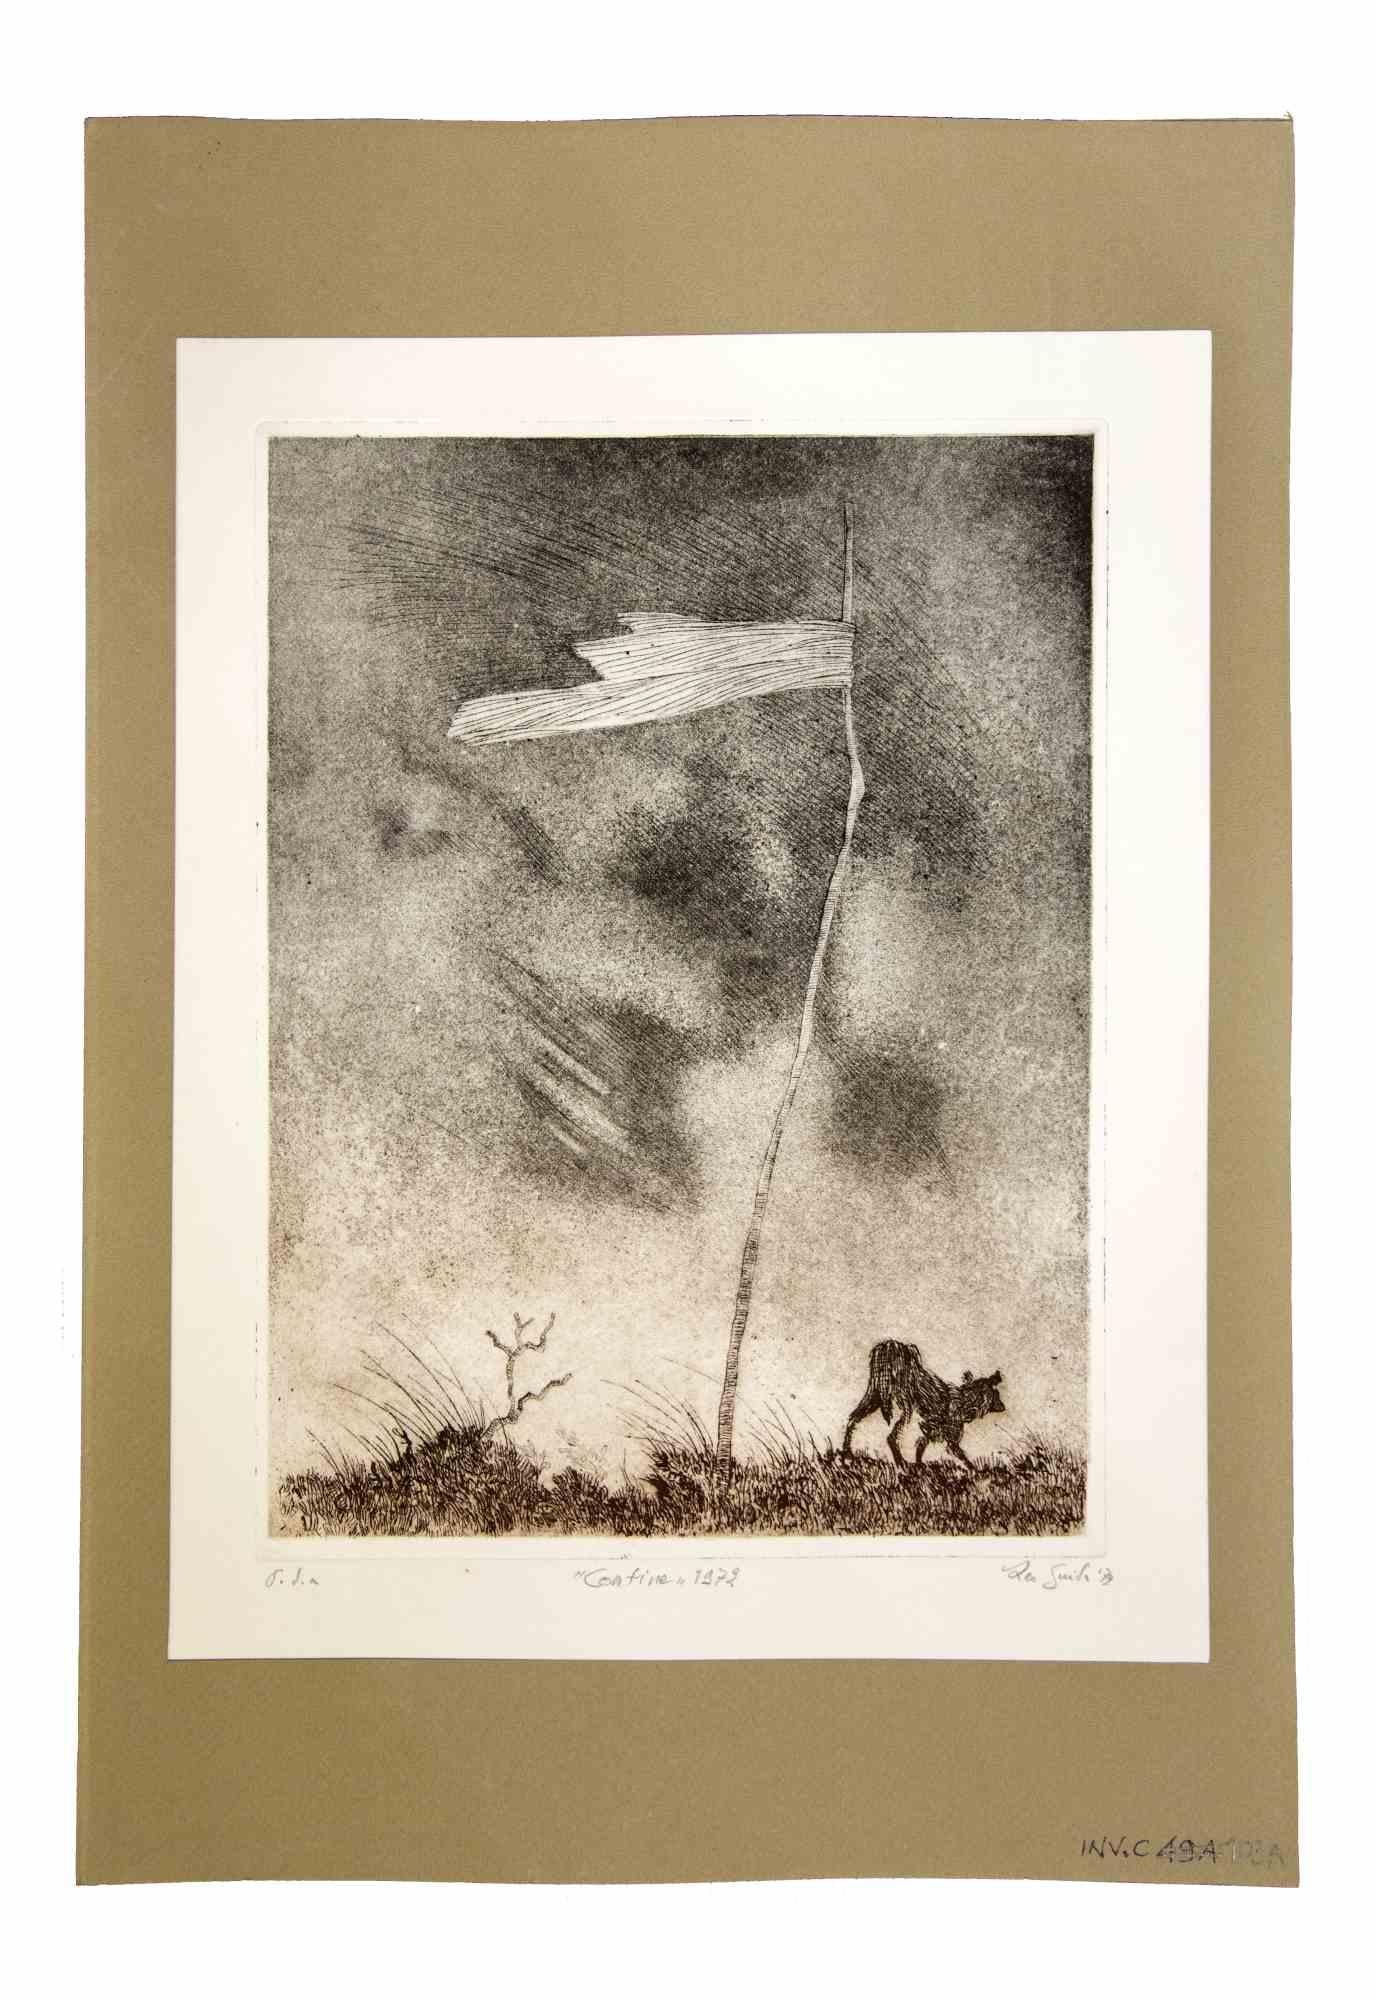 Lonely Flag is an original etching and aquatint realized by Leo Guida in 1972.

Guter Zustand.

Mounted on a white and brown cardboard passpartout (50x34.5 cm).

Hand signed and dated with pencil by the artist.

Leo Guida  (1992 - 2017). Sensitive